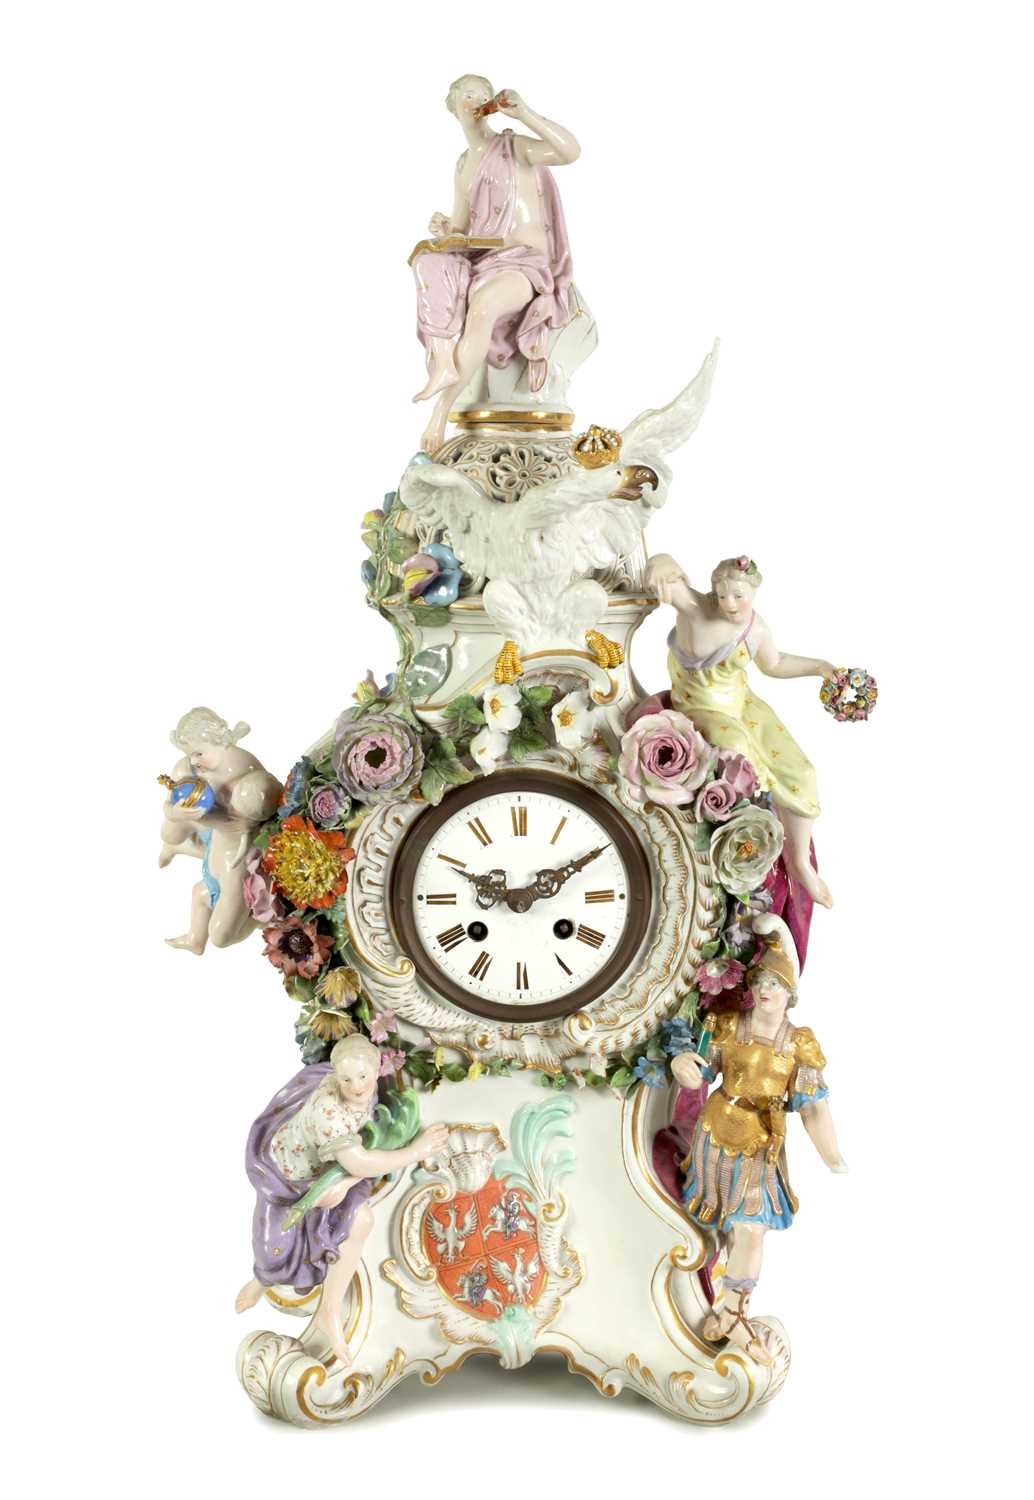 AN IMPRESSIVE MID/LATE 19TH CENTURY MEISSEN MANTEL CLOCK OF LARGE SIZE